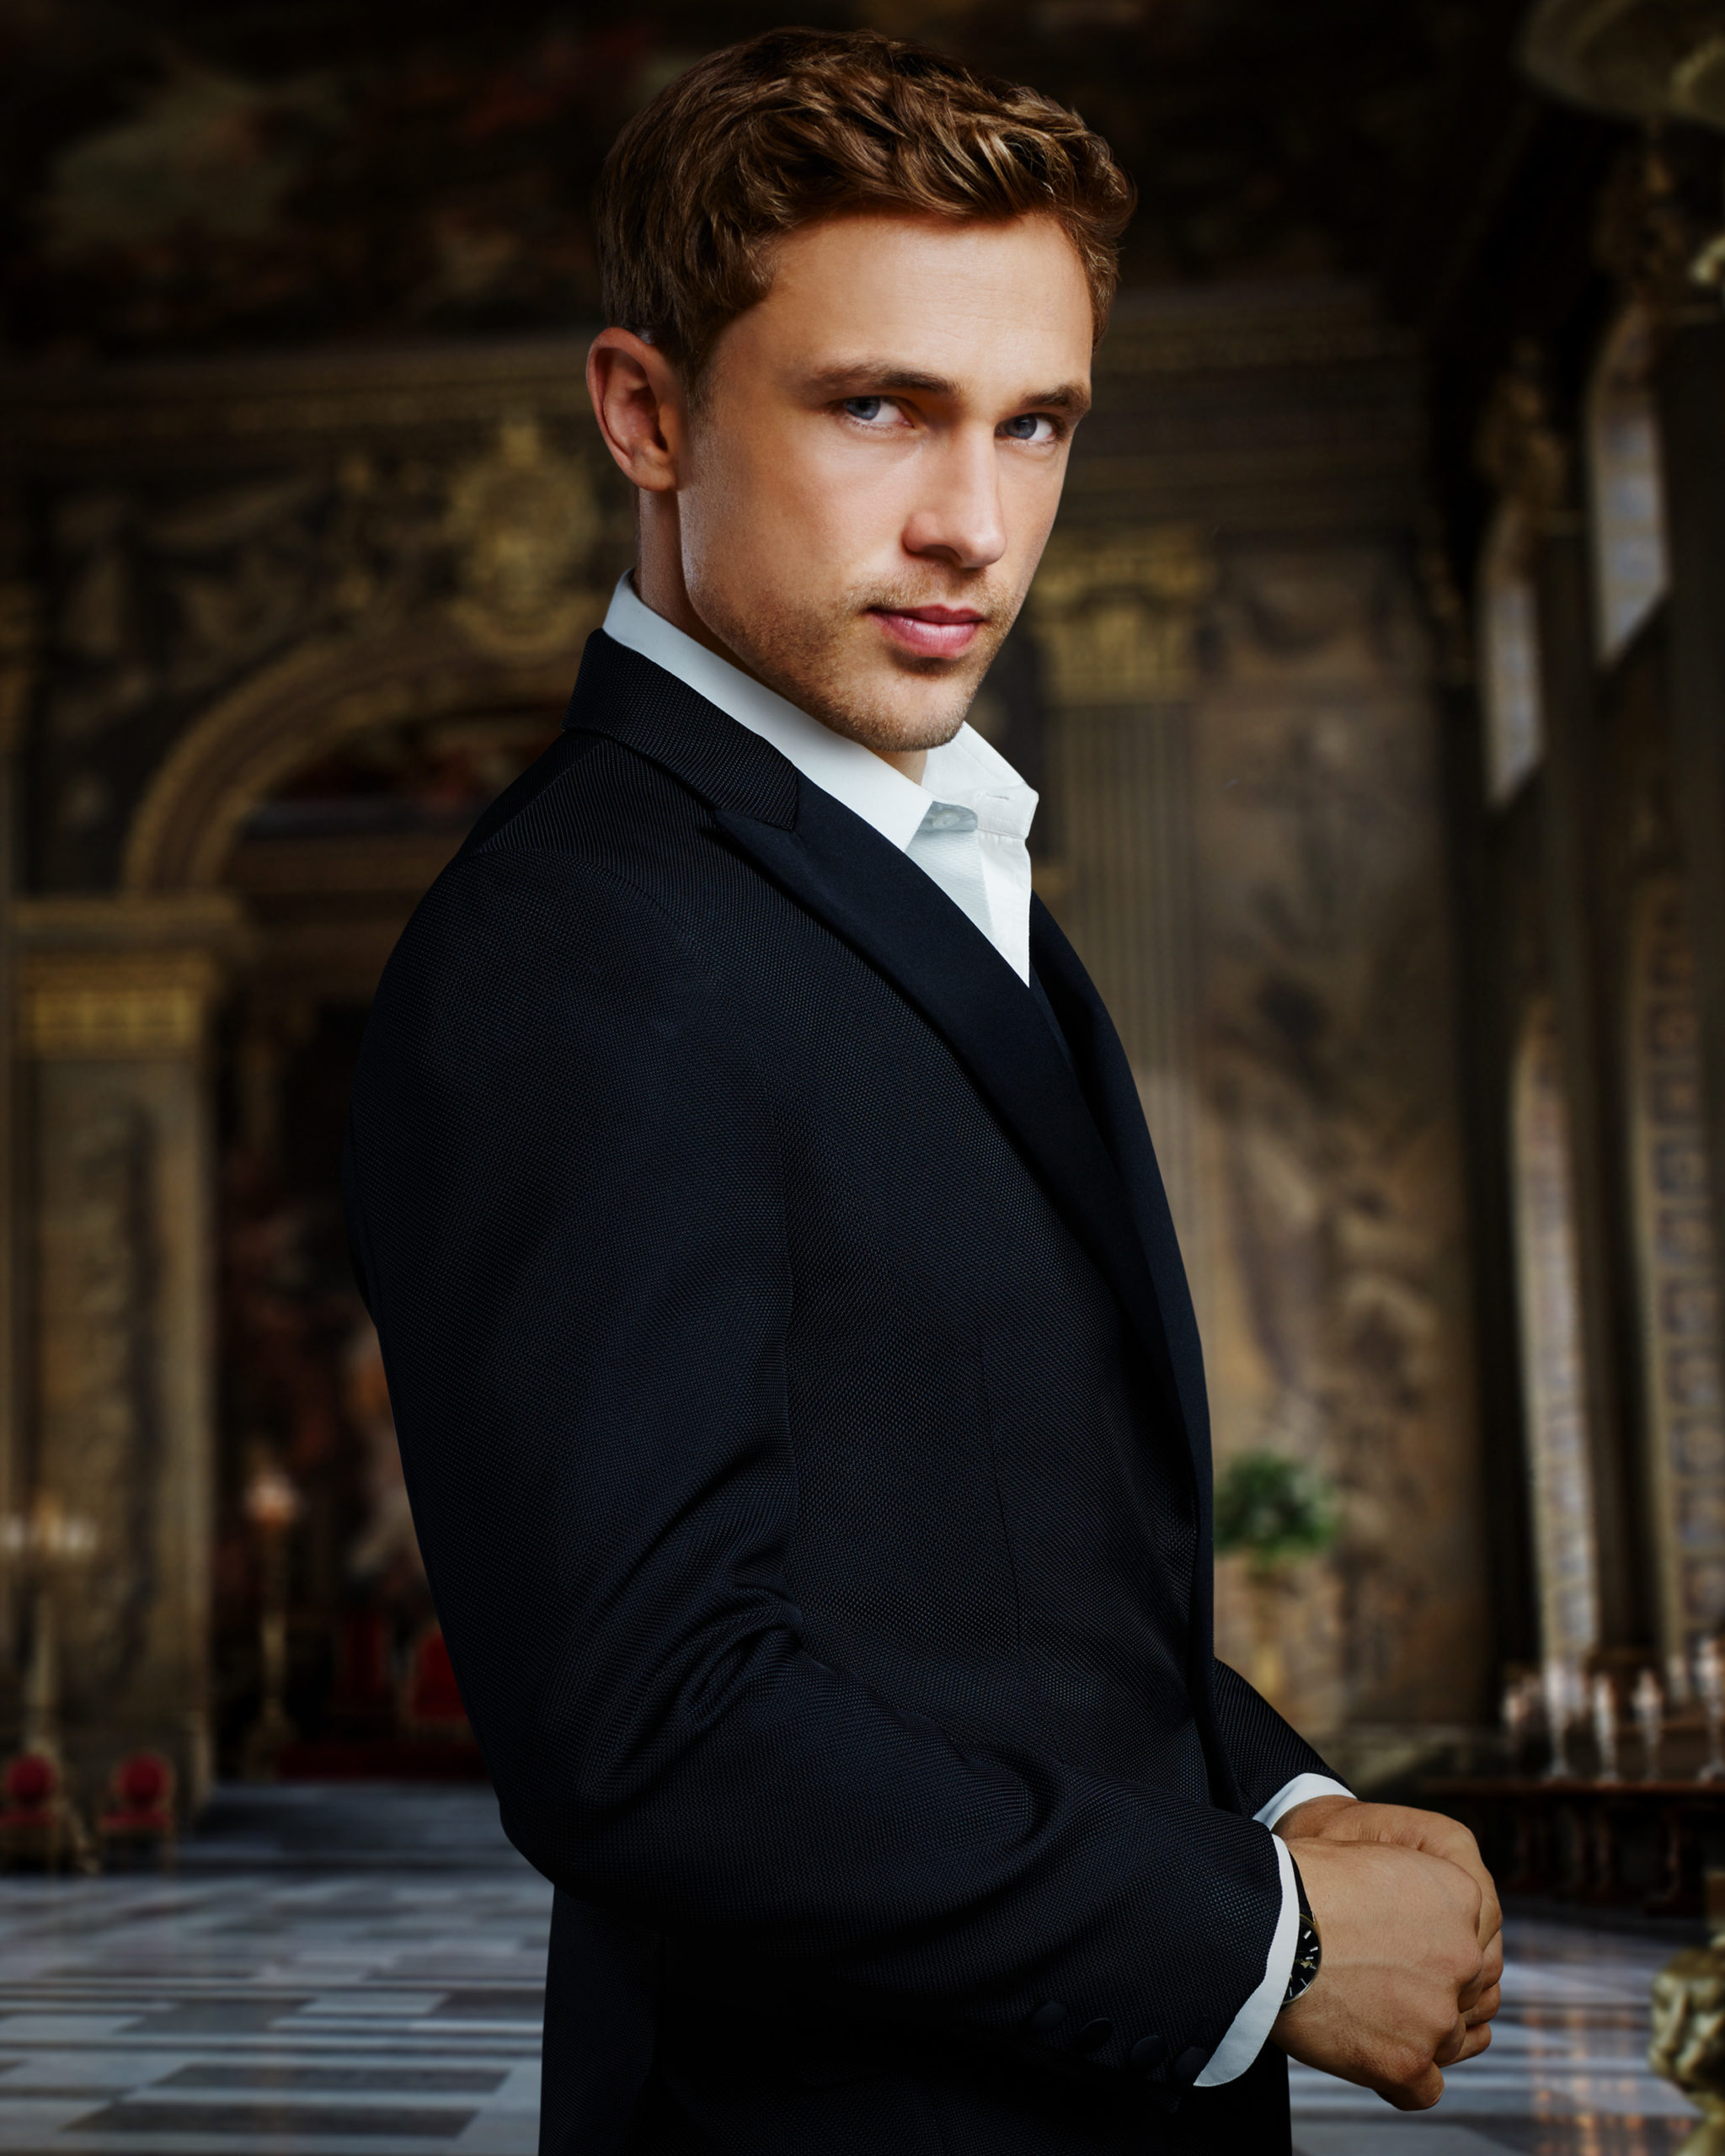 William Moseley as Liam in The Royals